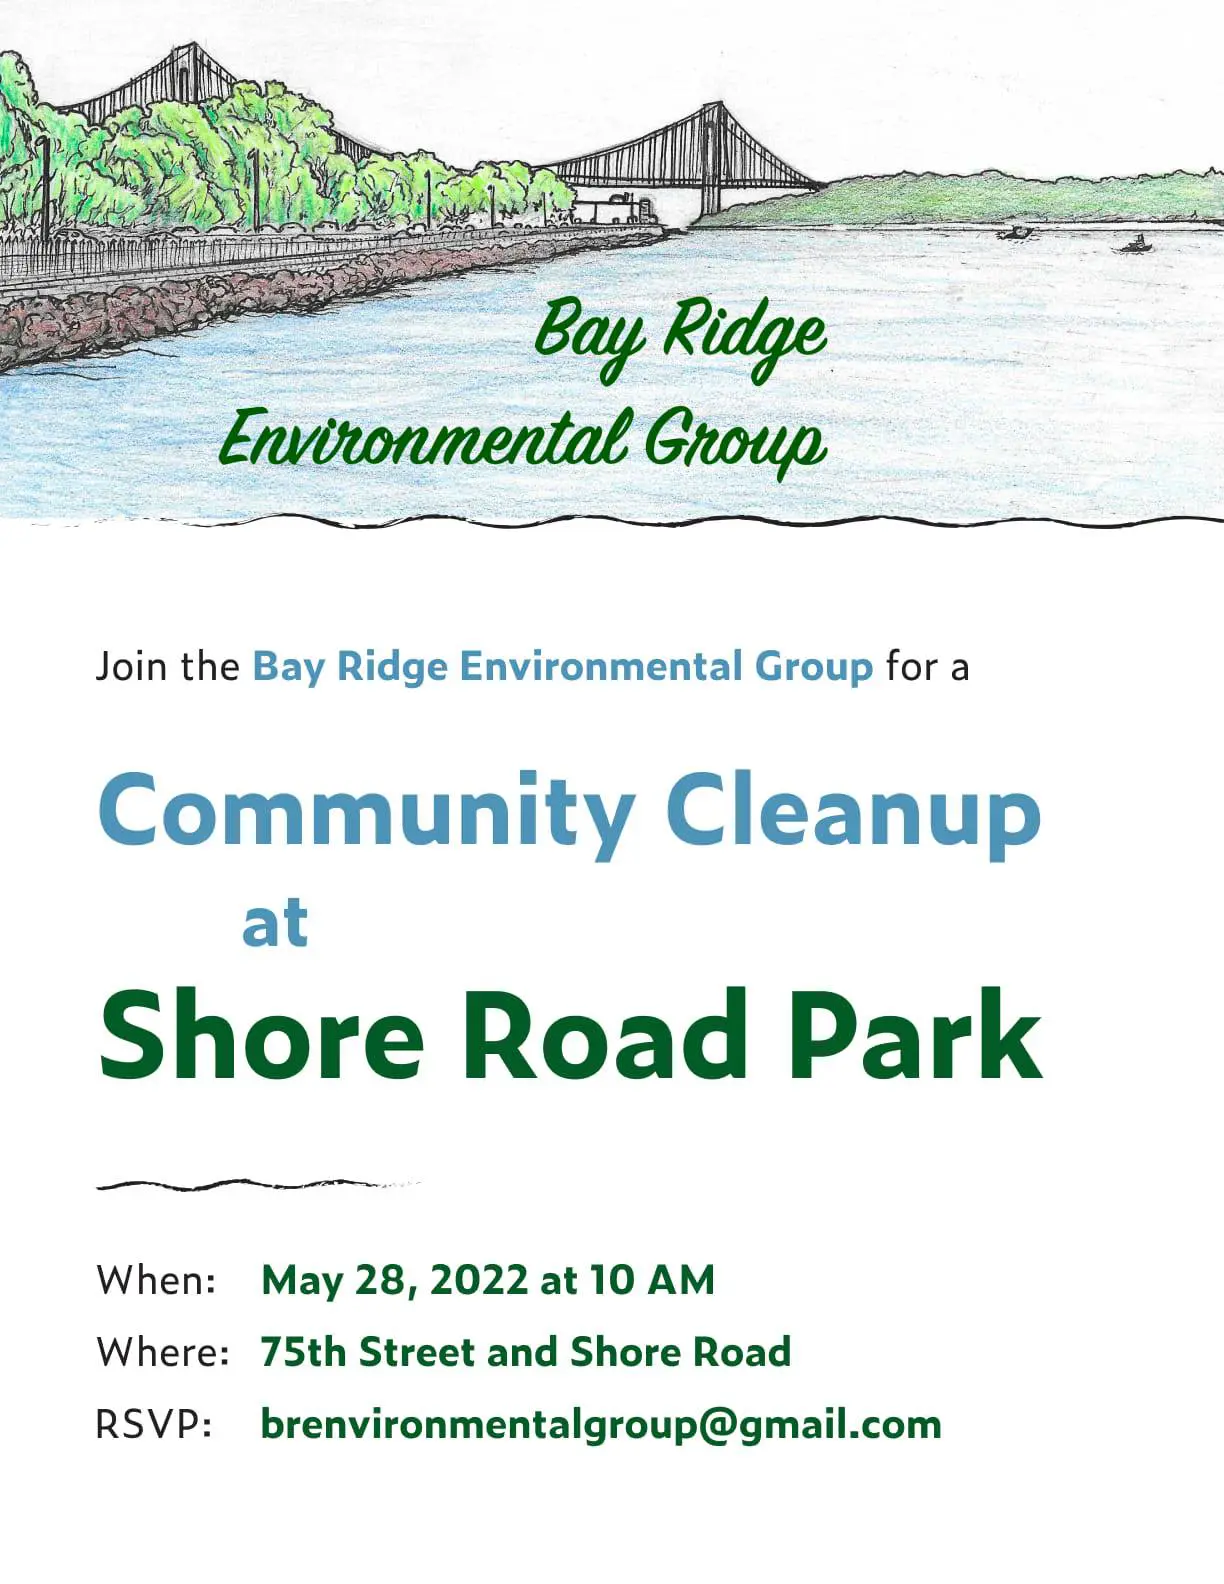 Graphic advertising a Community Cleanup at Shore Road Park